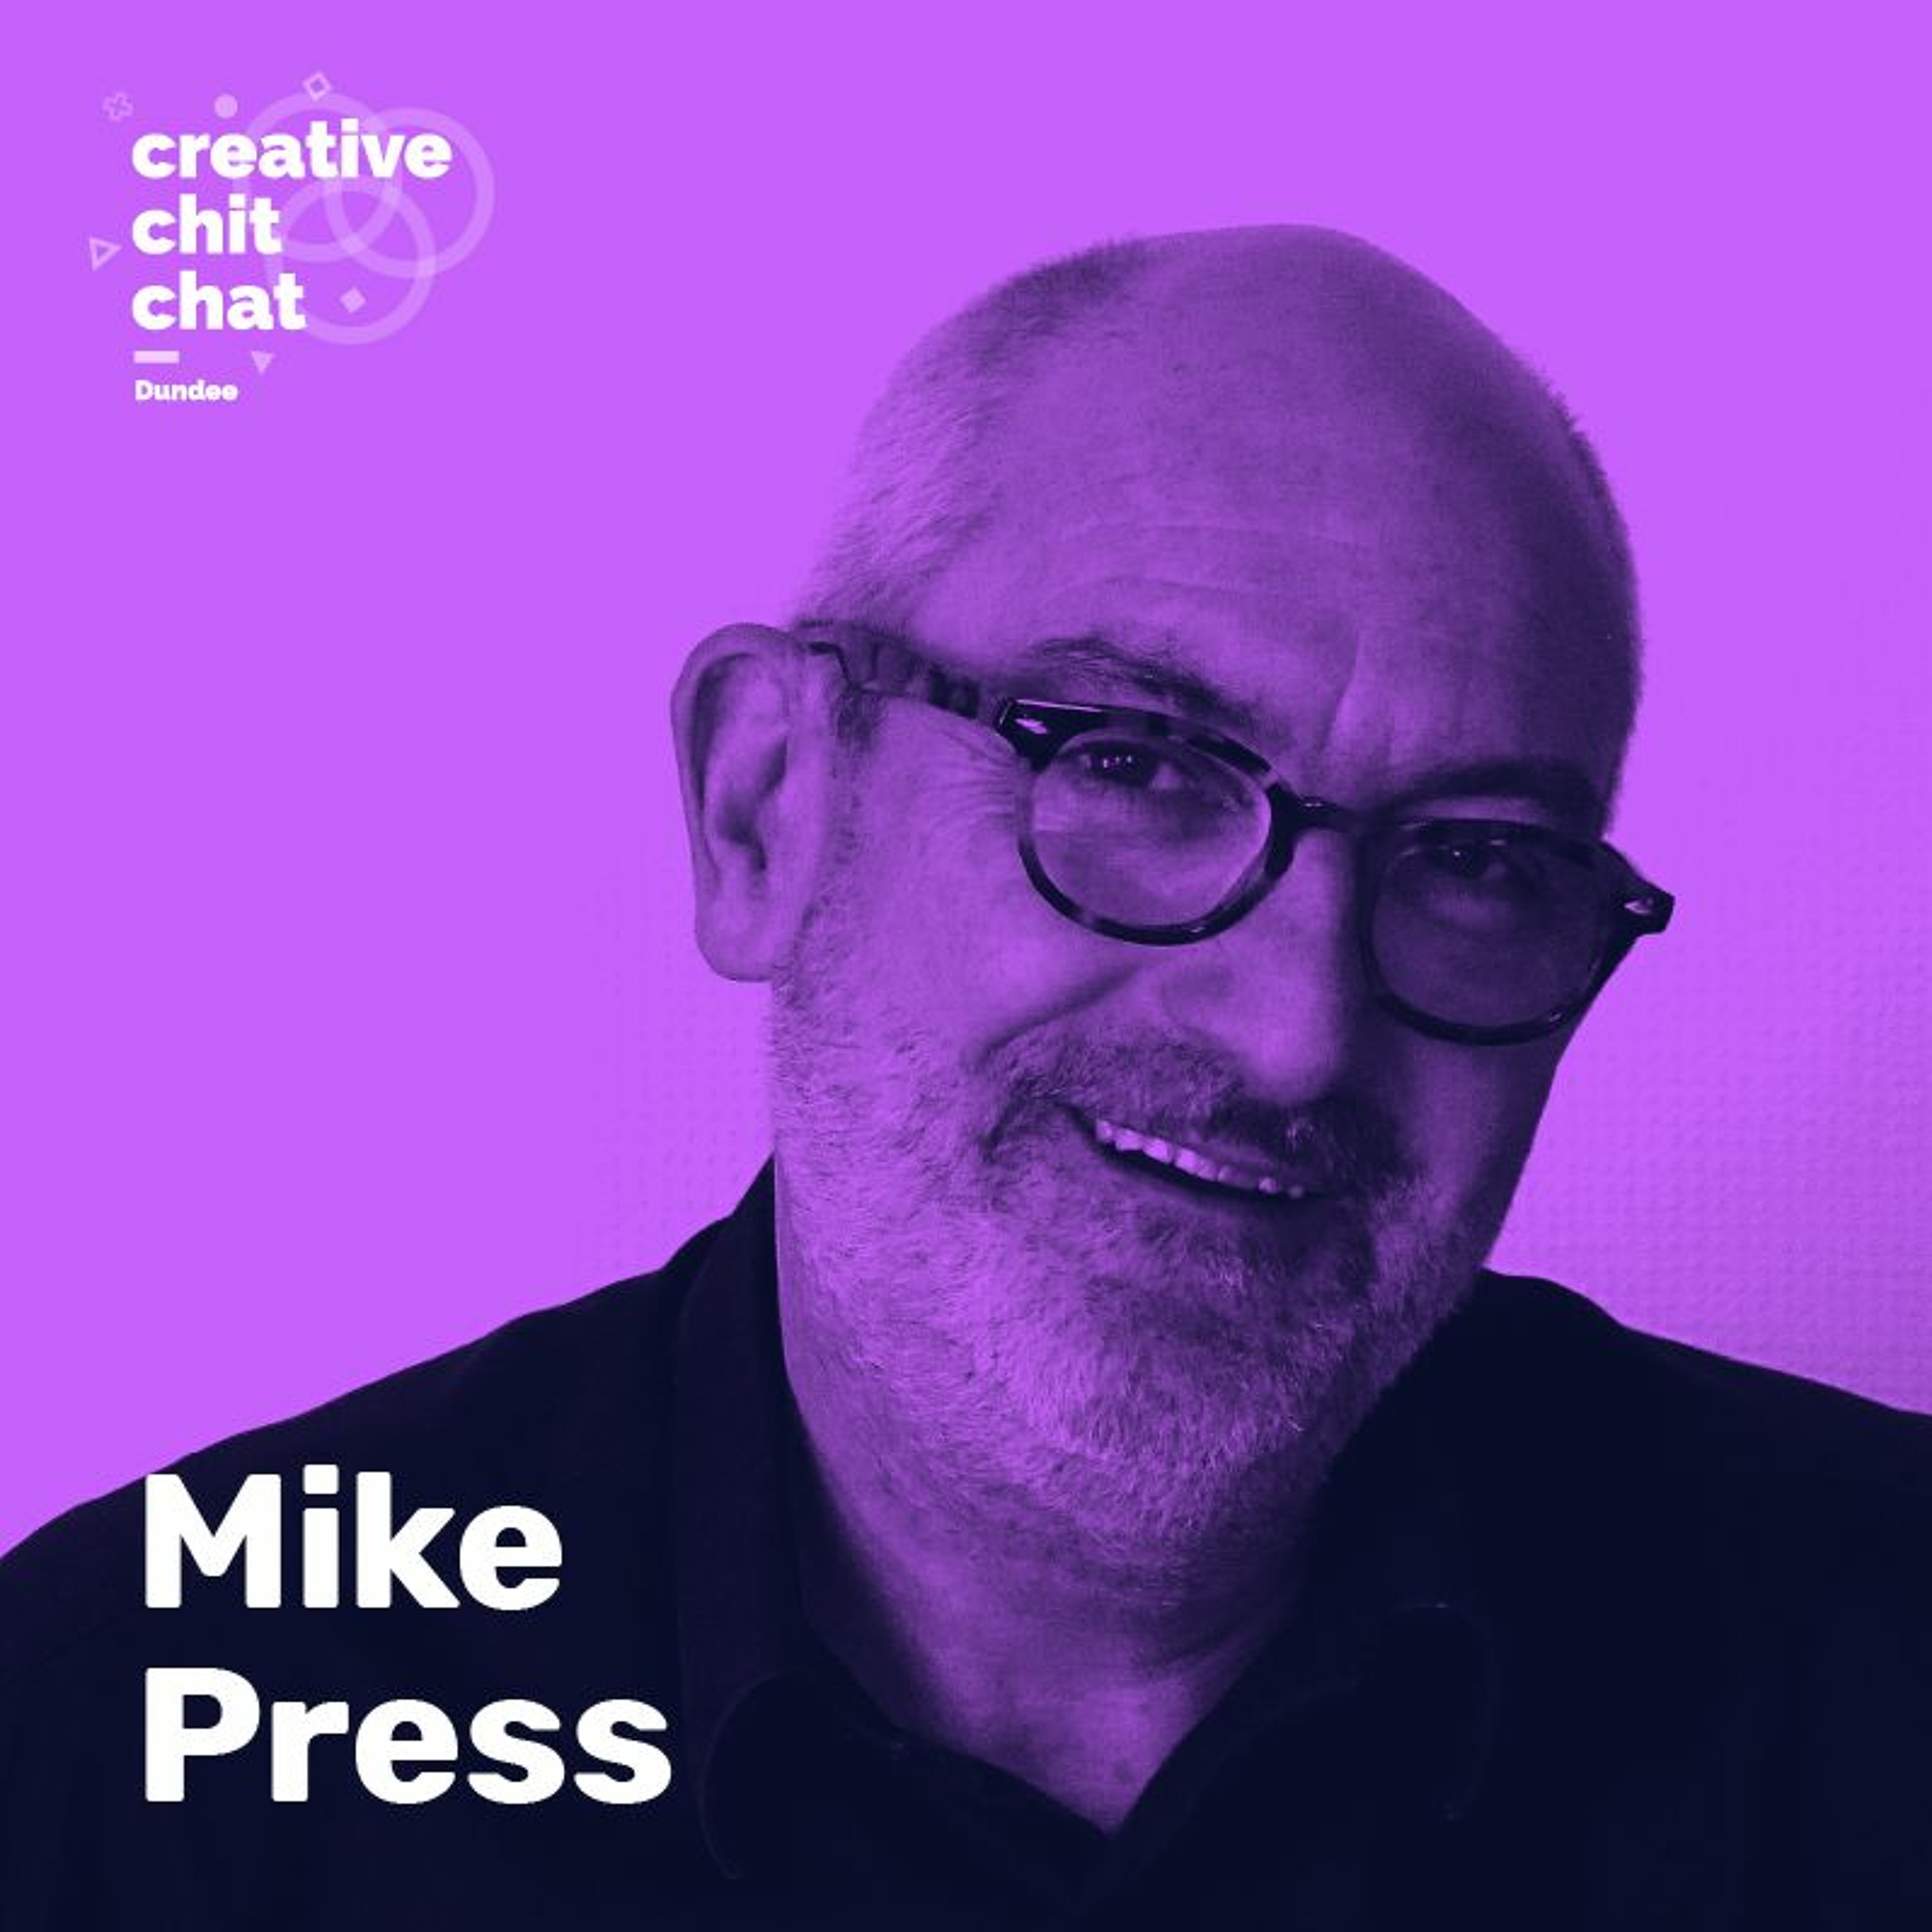 Mike Press - Service Design before it existed